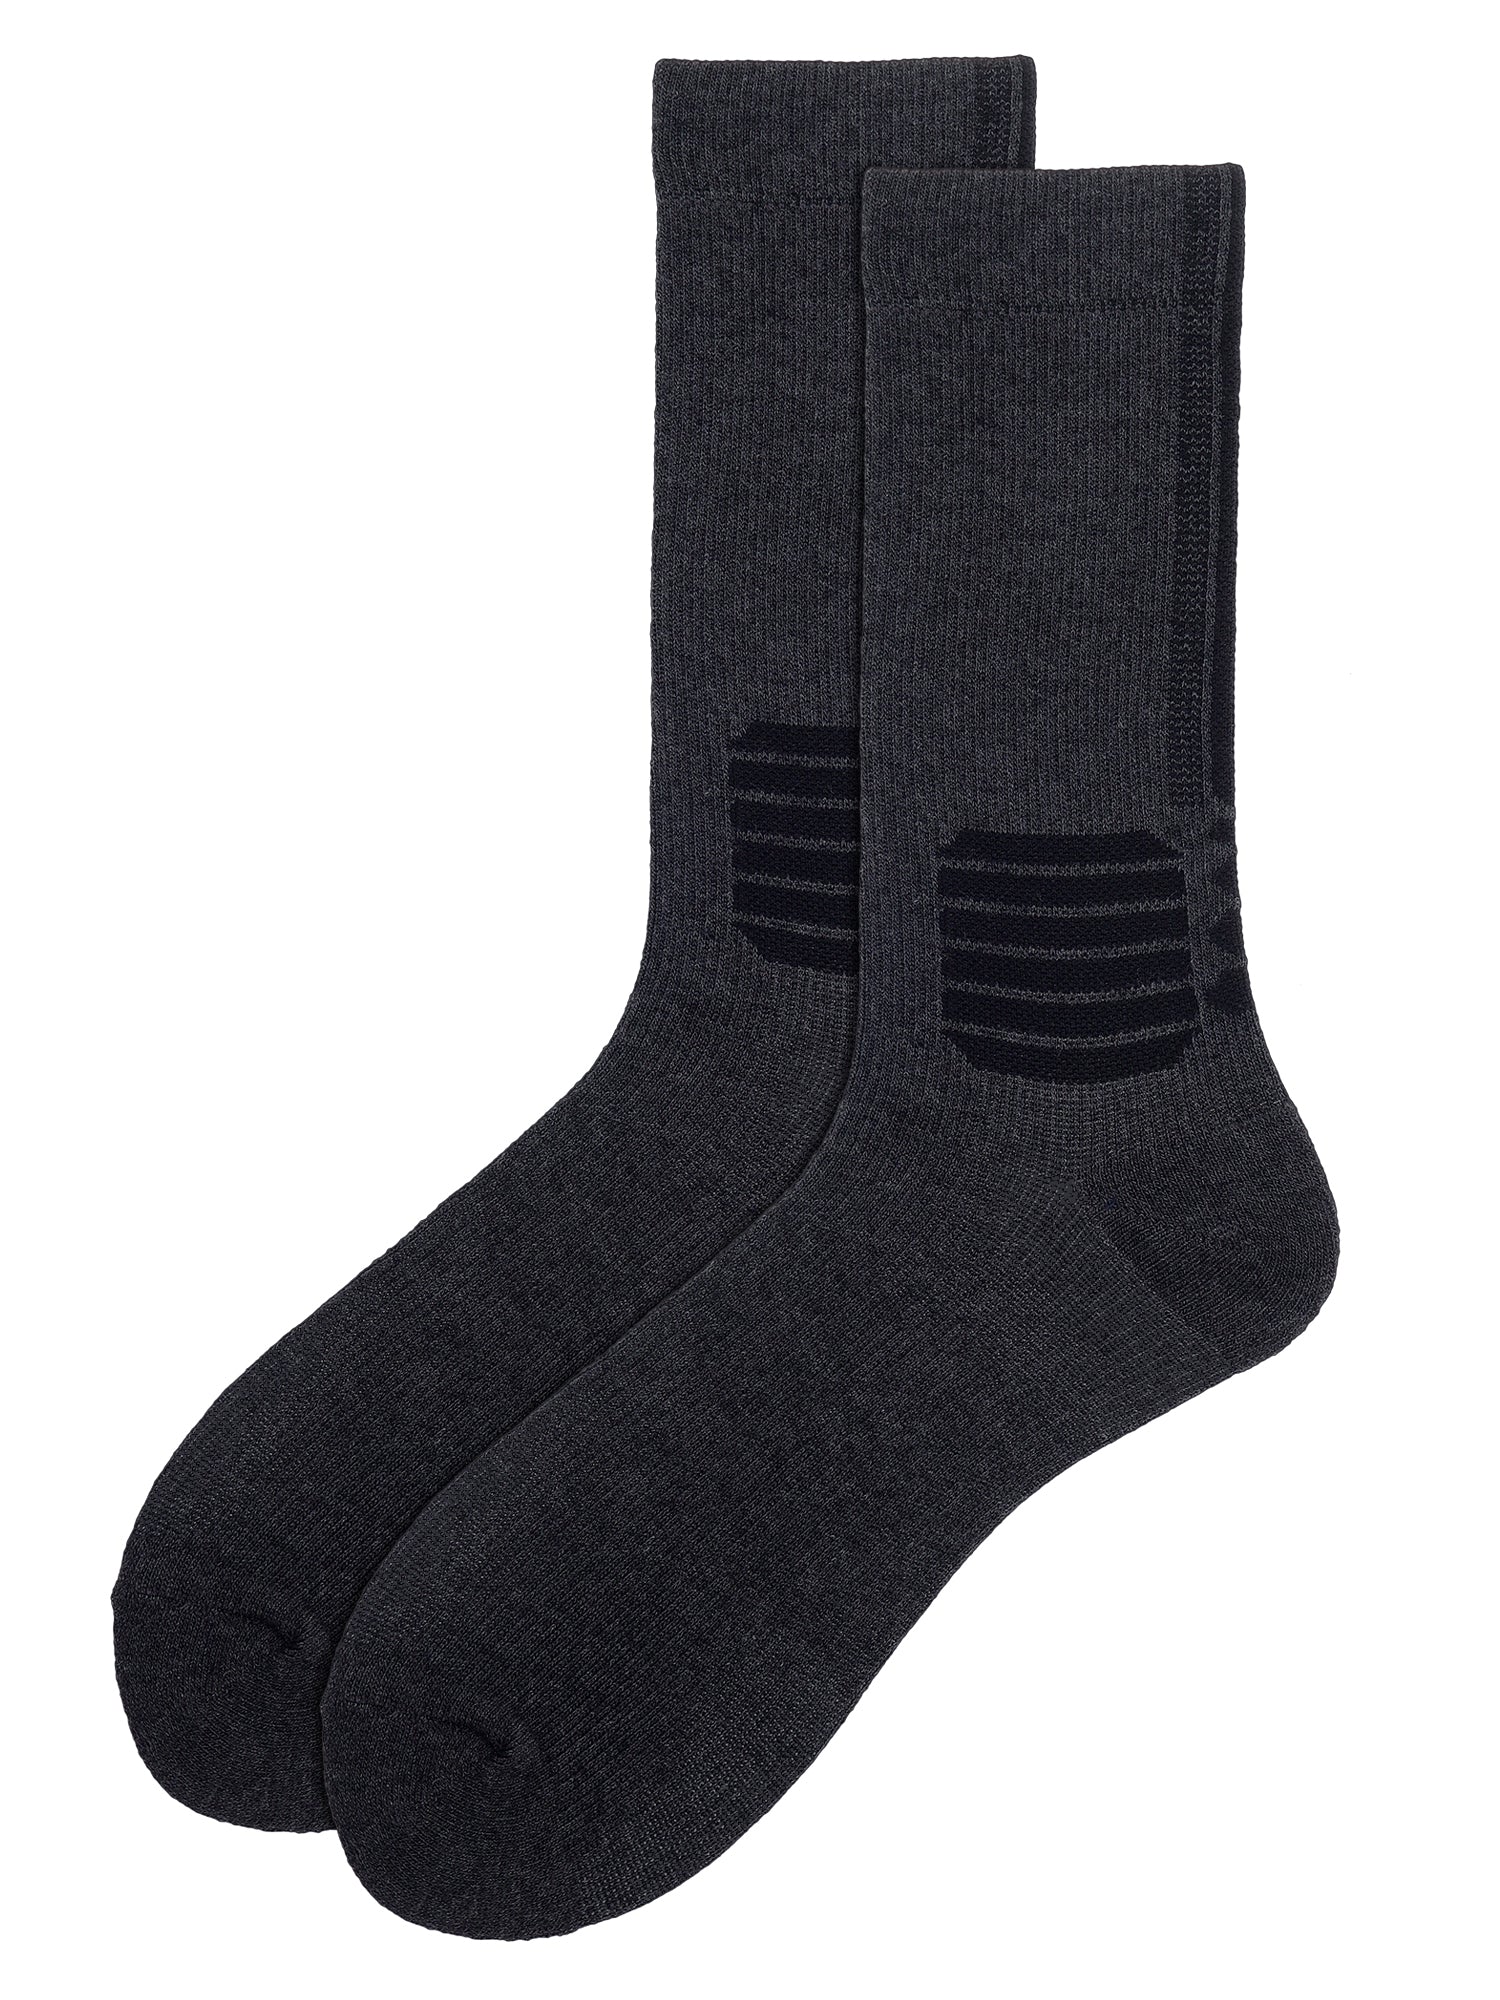 Compression Therapy | The Ultimate Box Of 8 Pairs | Travel Socks